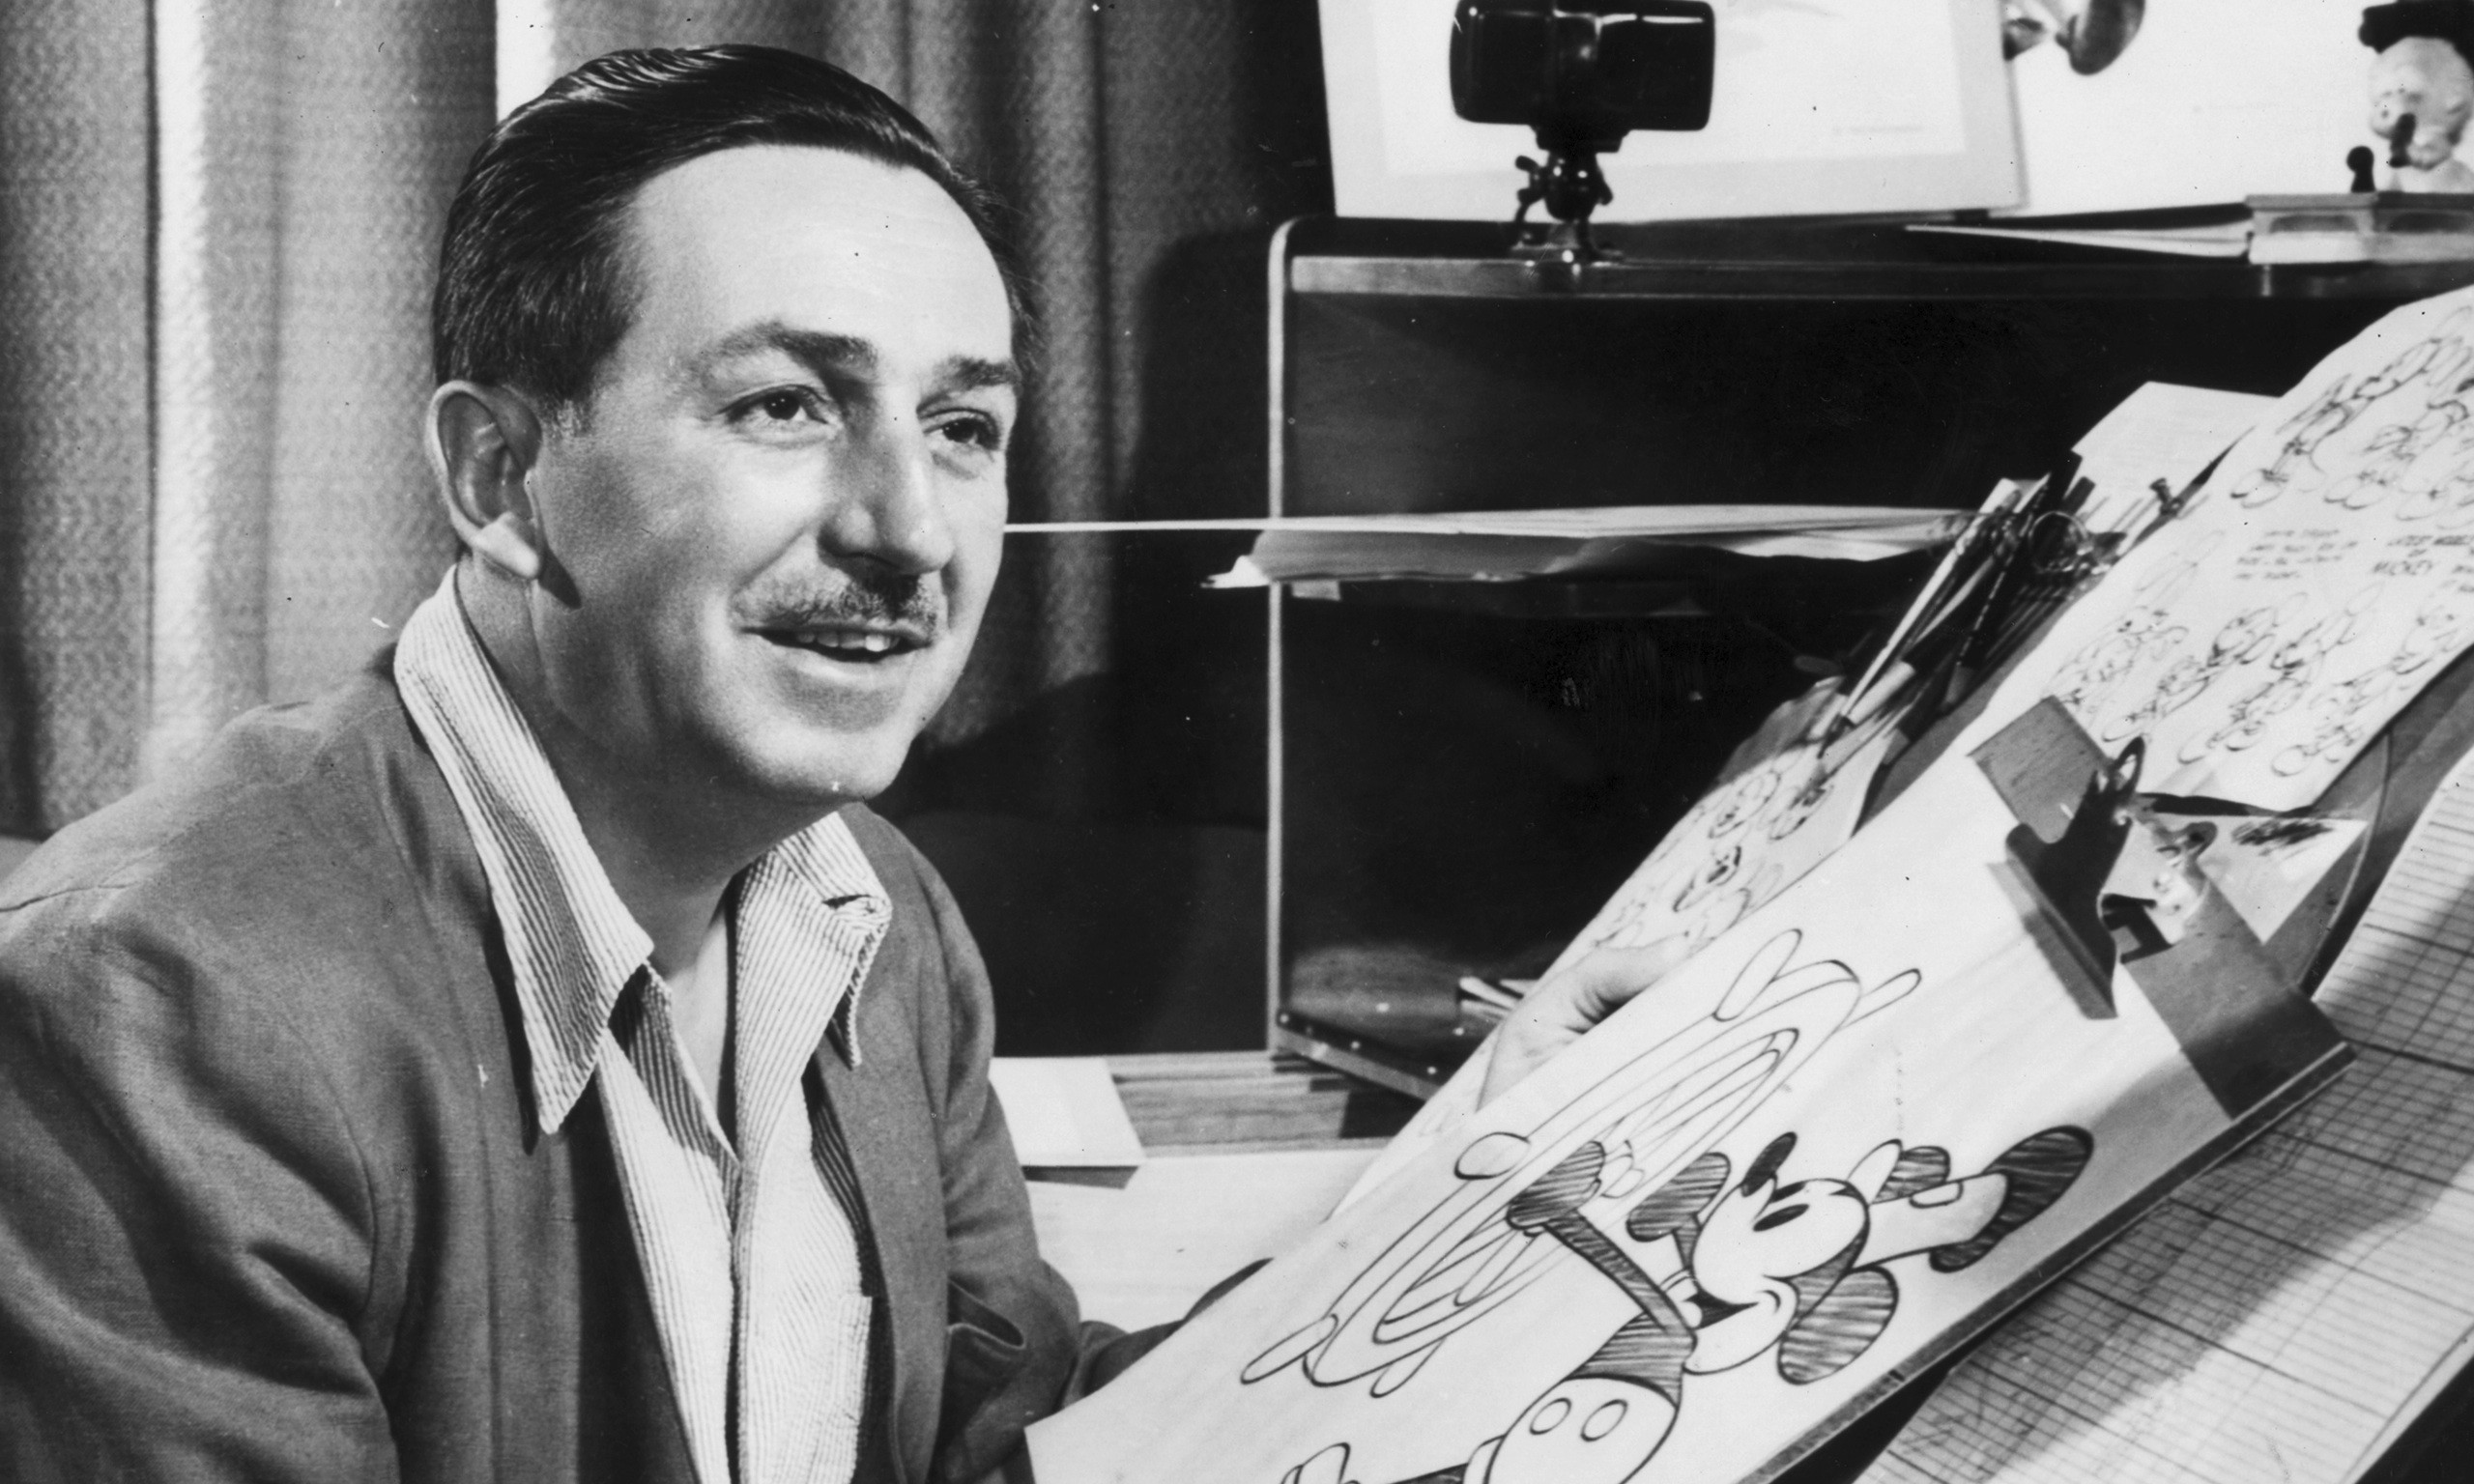 Mr Walt Disney sits at his drawing board in his studio, drawing a sketch of Mickey Mouse